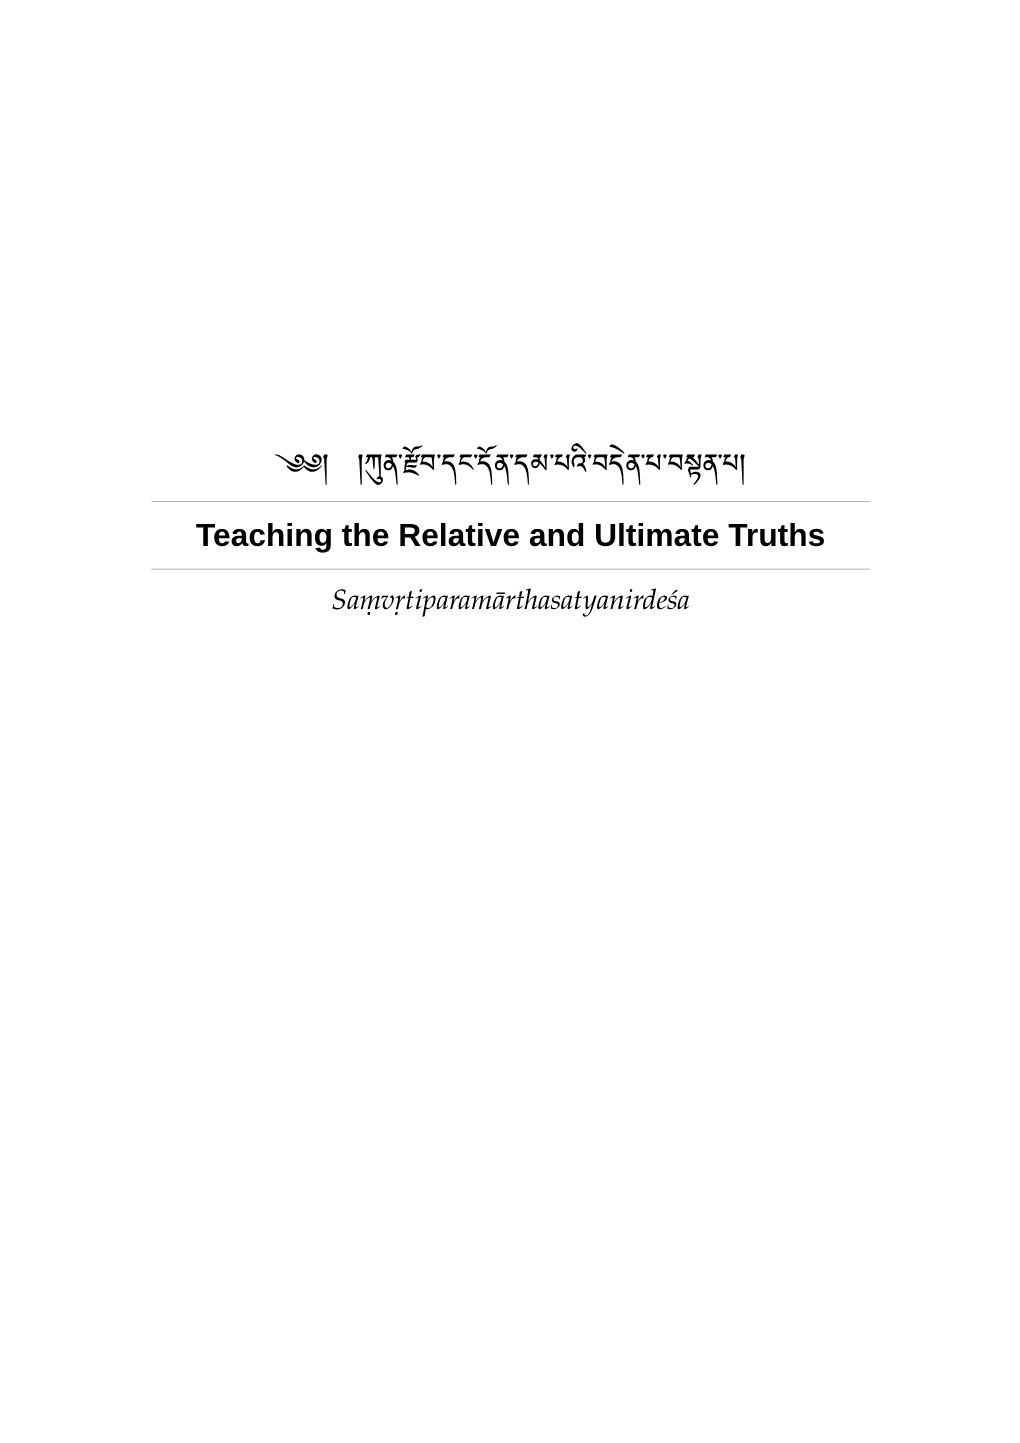 Teaching the Relative and Ultimate Truths